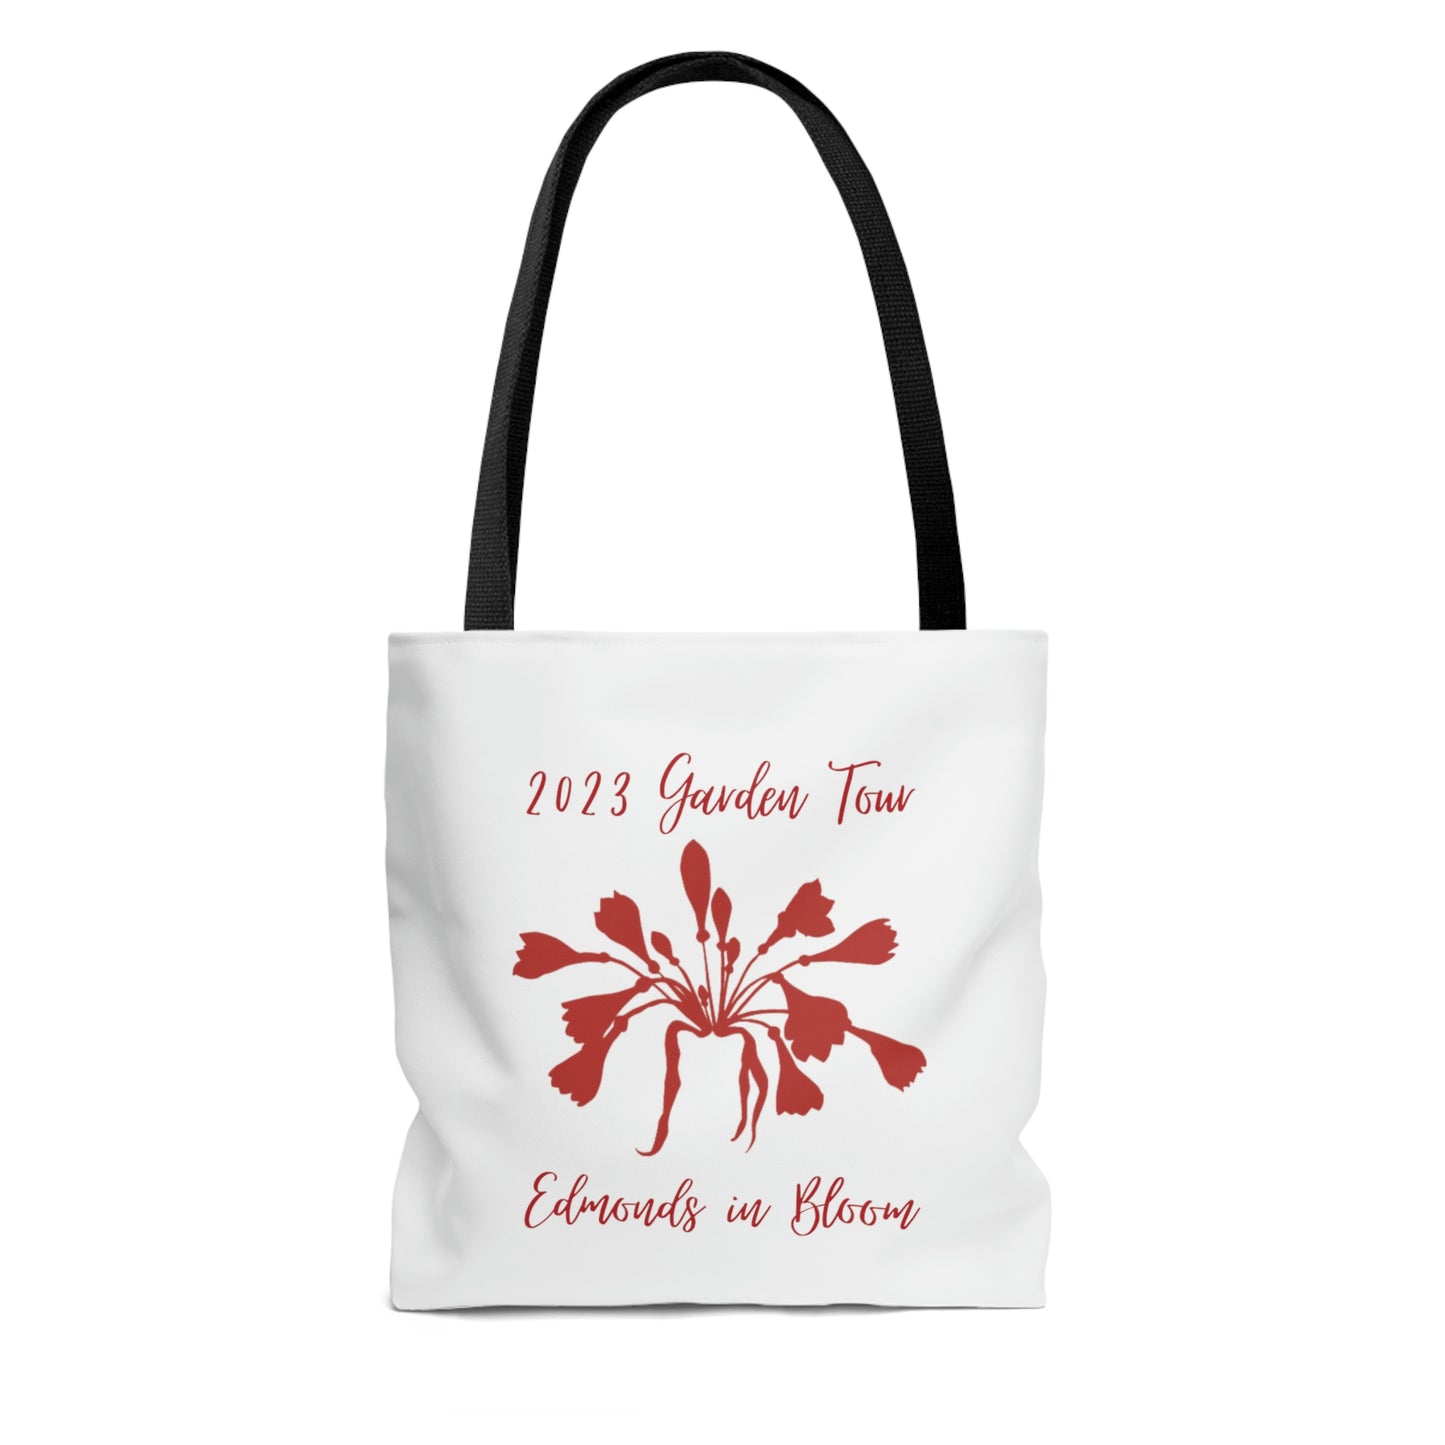 2023 Garden Tour Tote Bag (Red Graphic)